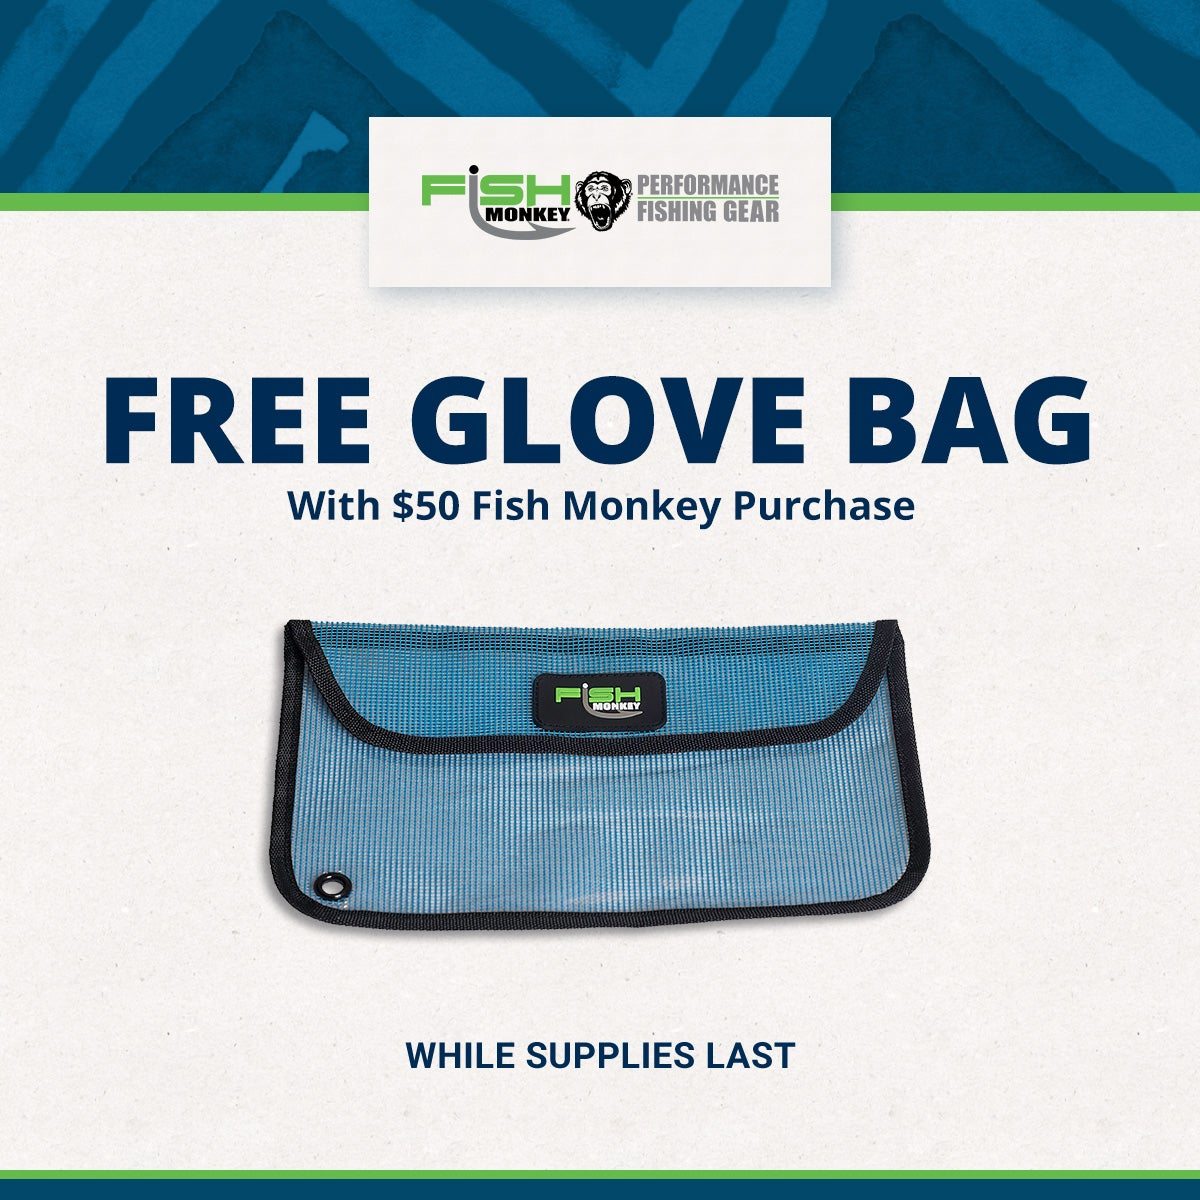 FREE Glove Bag With $50 Fish Monkey Purchase